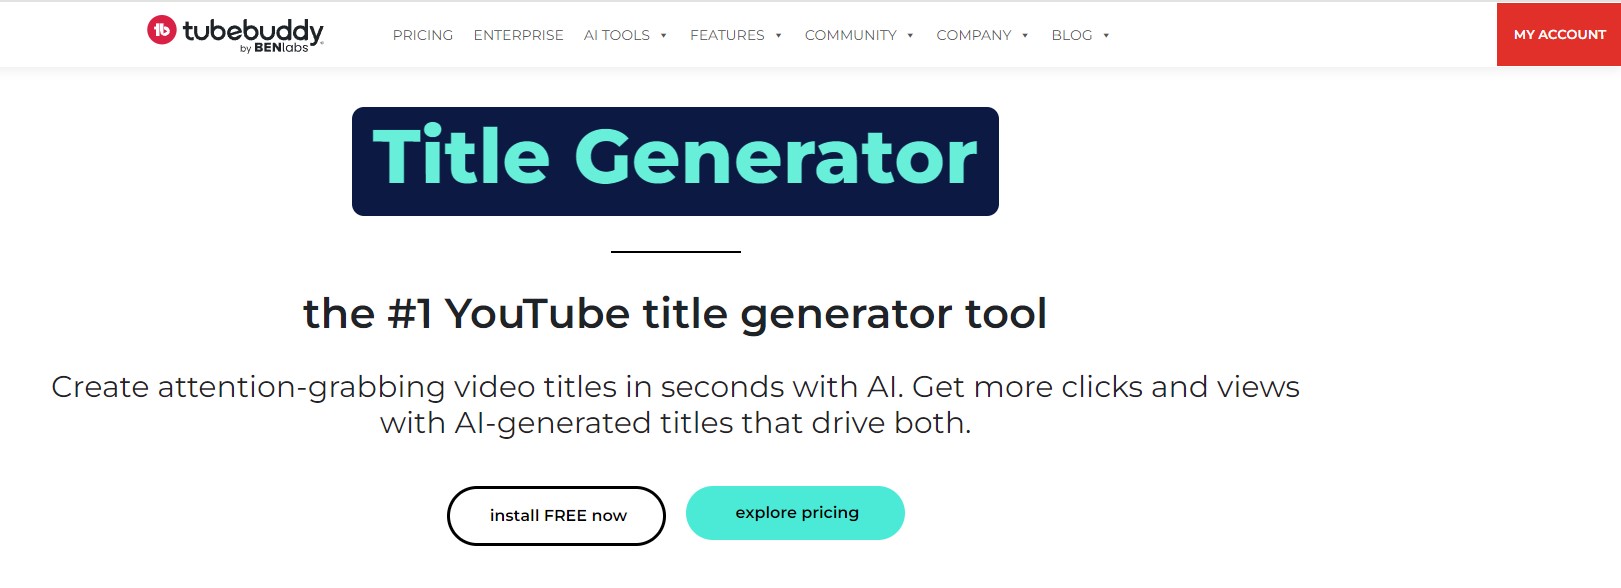 Best TubeBuddy for YouTube SEO Tools